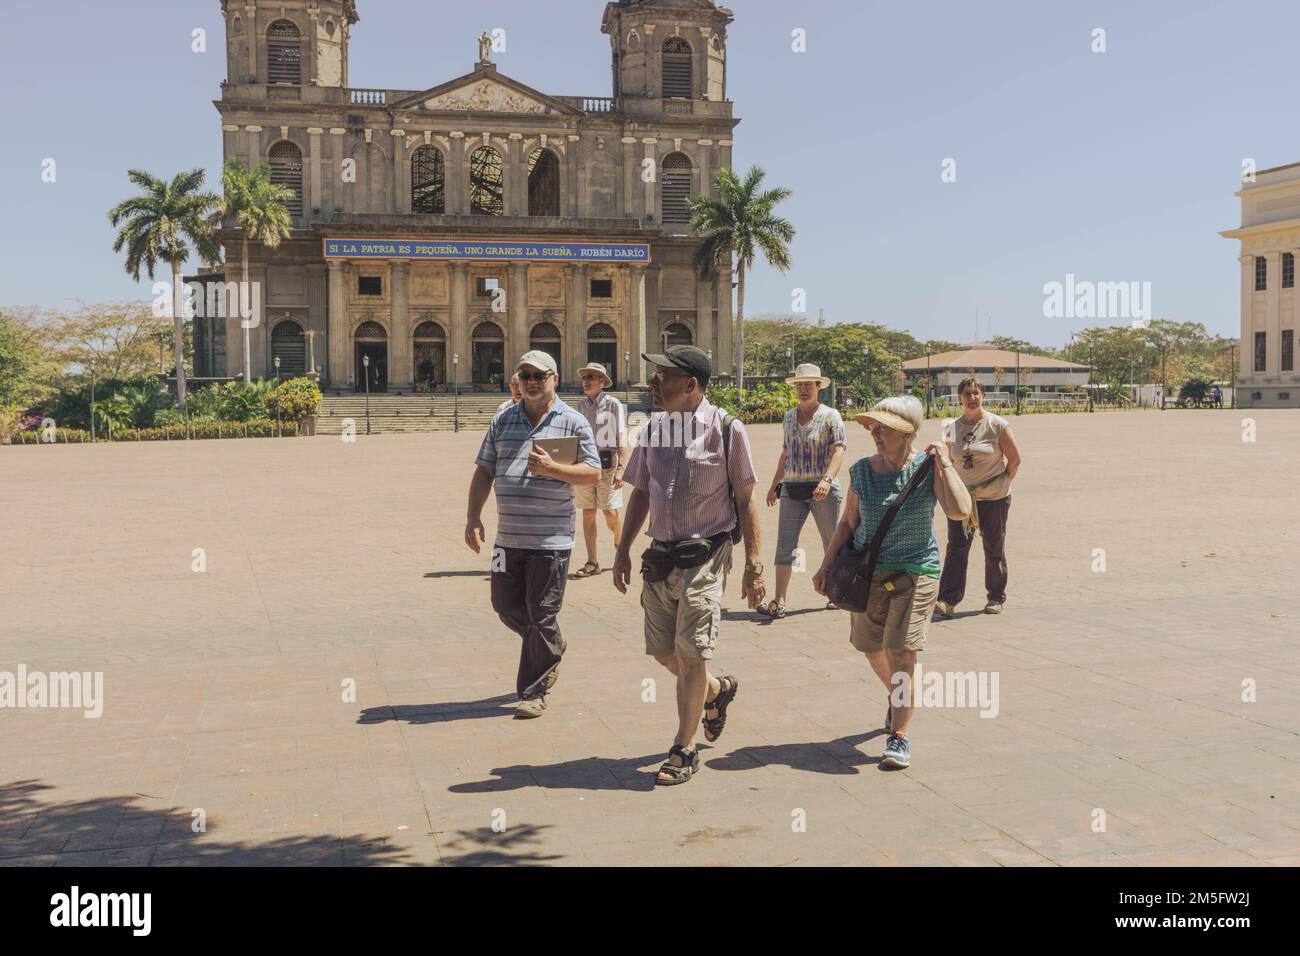 Tourist with a guide walk across the plaza in front of the old  cathedral that was damaged in the 1972 Nicaragua earthquake. Stock Photo